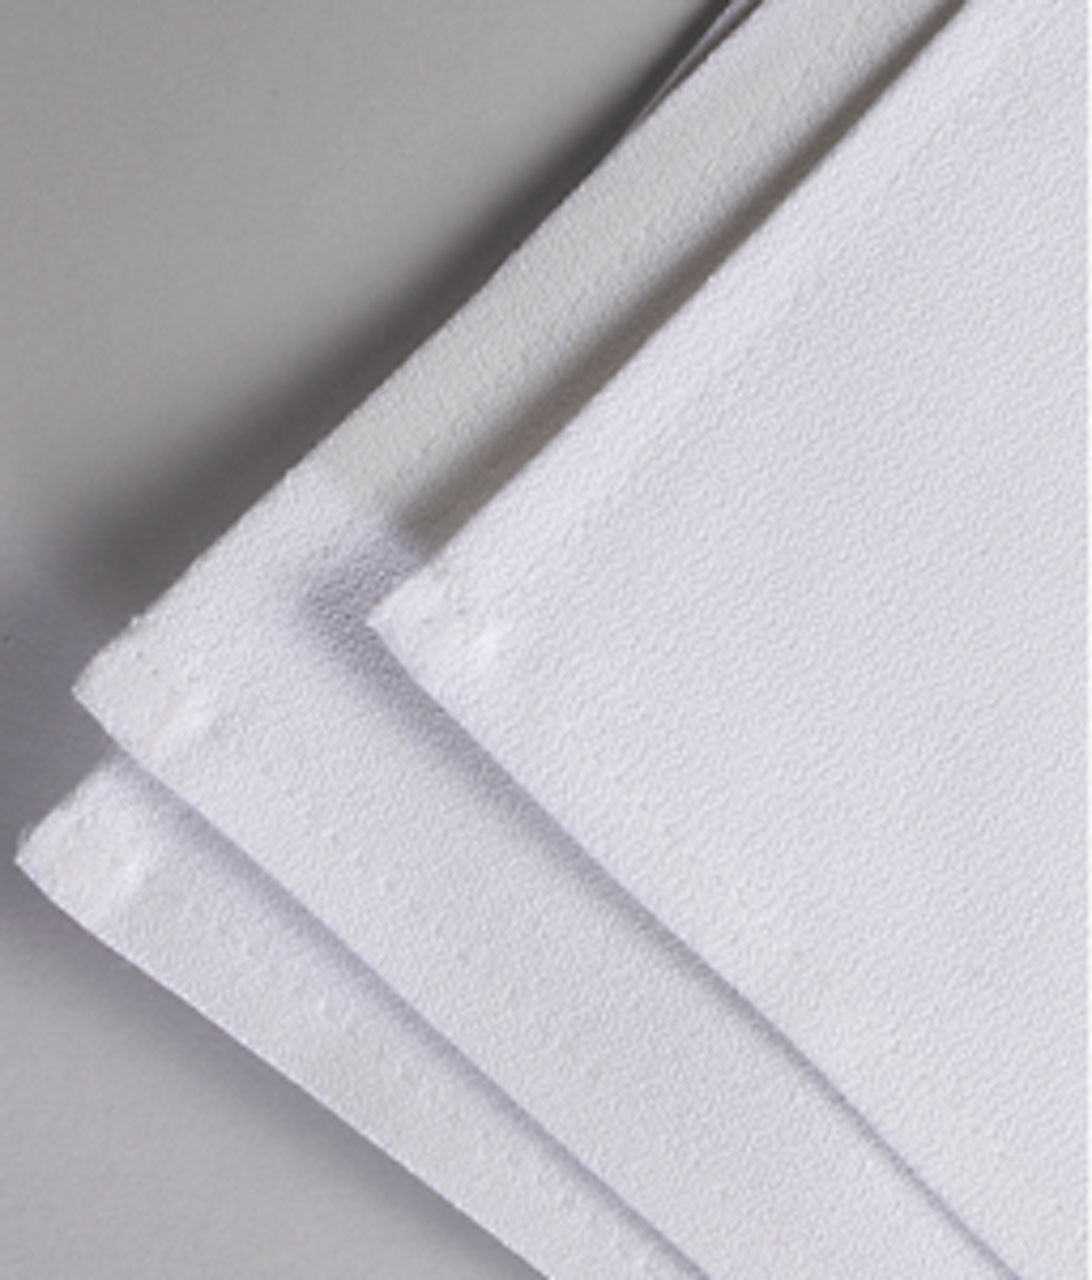 Is the weave type of the Cotton Momie Cloth Napkins specified?